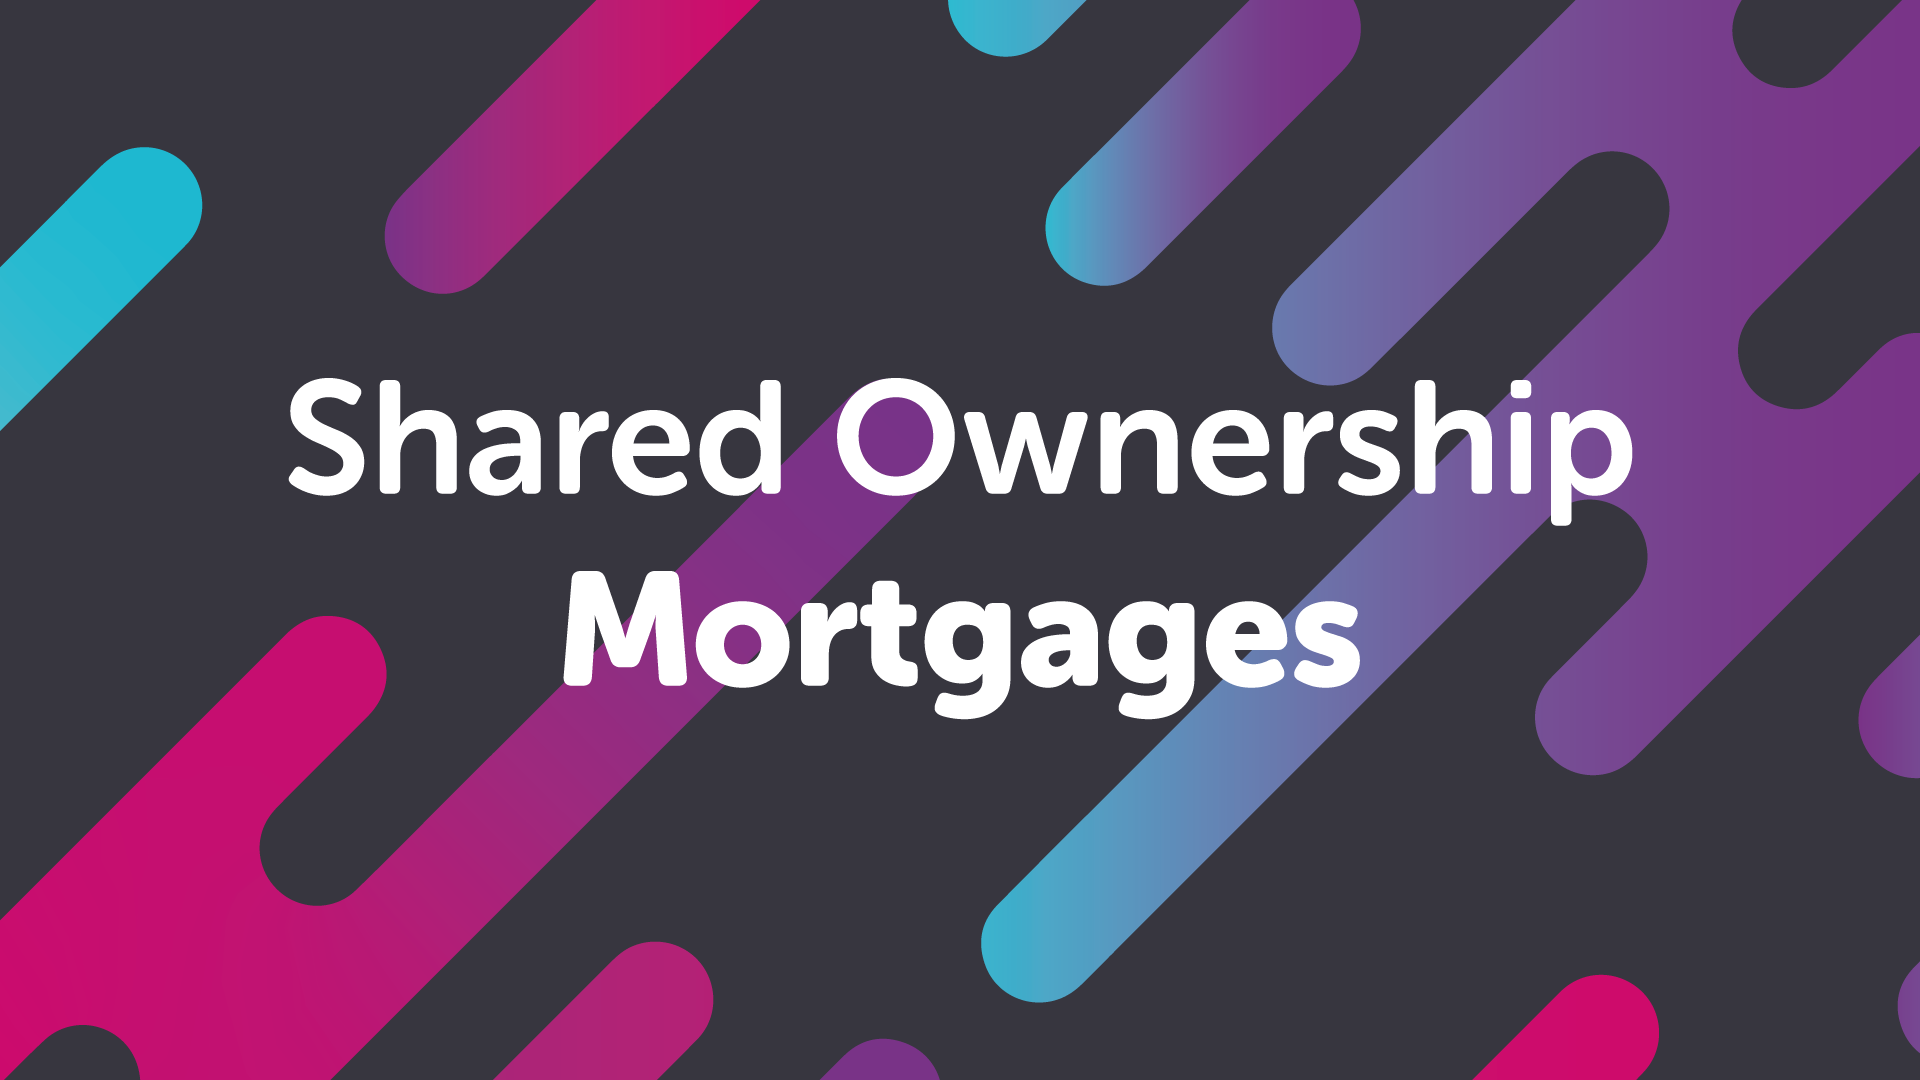 Shared Ownership – What is it? How does it work?